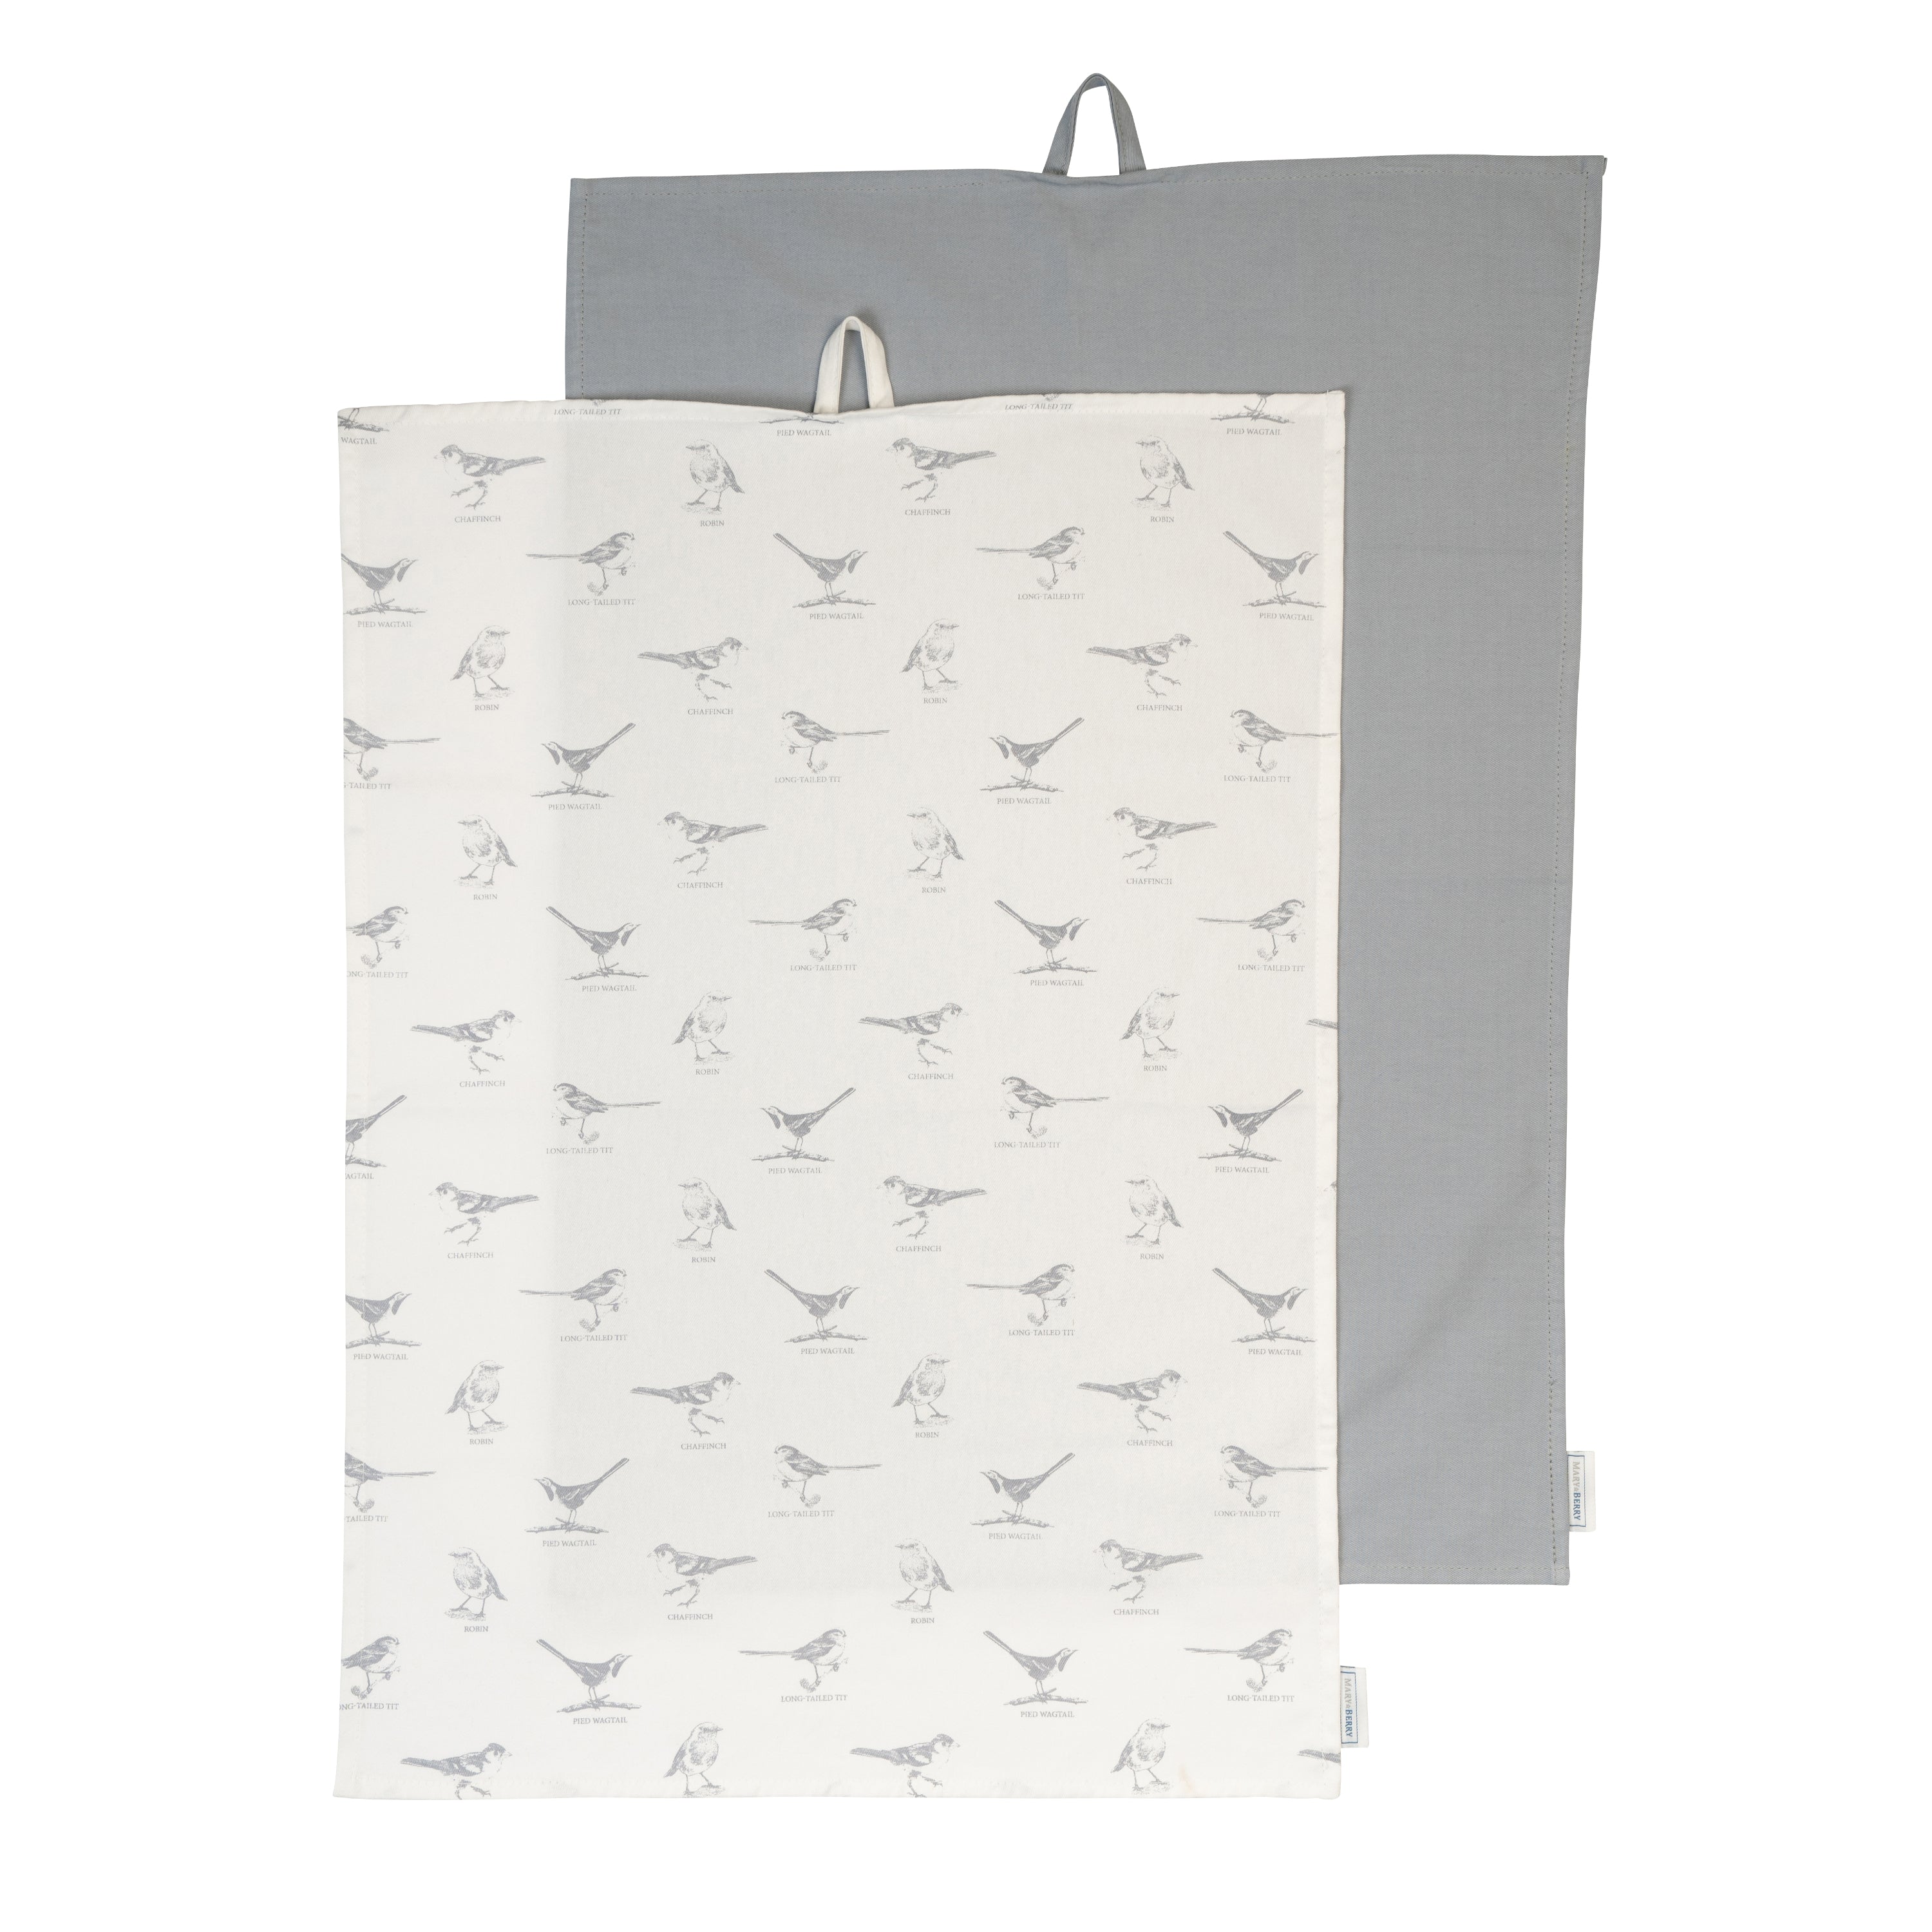 MARY BERRY ENGLISH GARDEN SET OF TWO TEA TOWELS | BIRDS